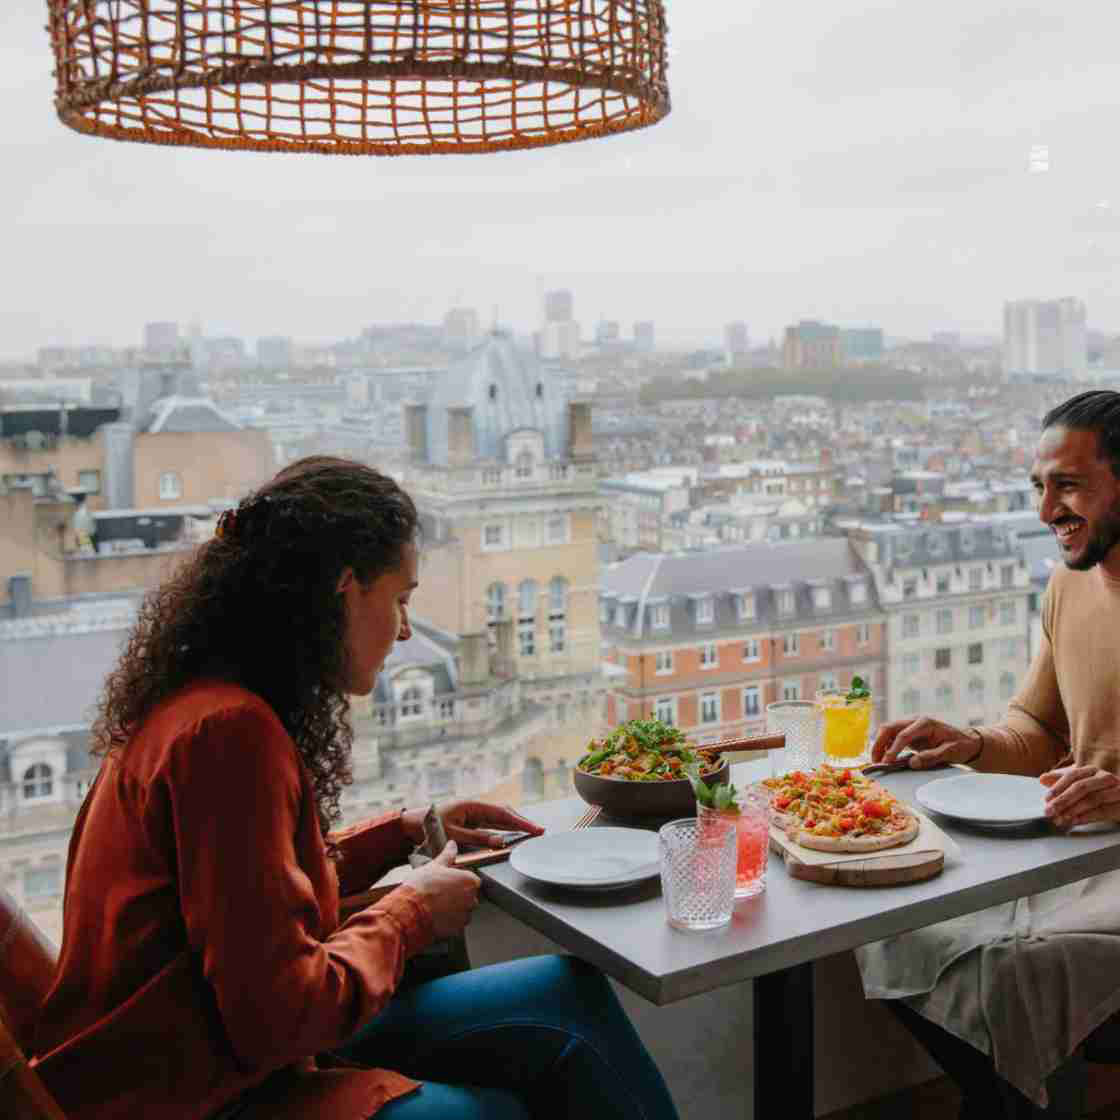 Man and woman eating at a table by a view of a city